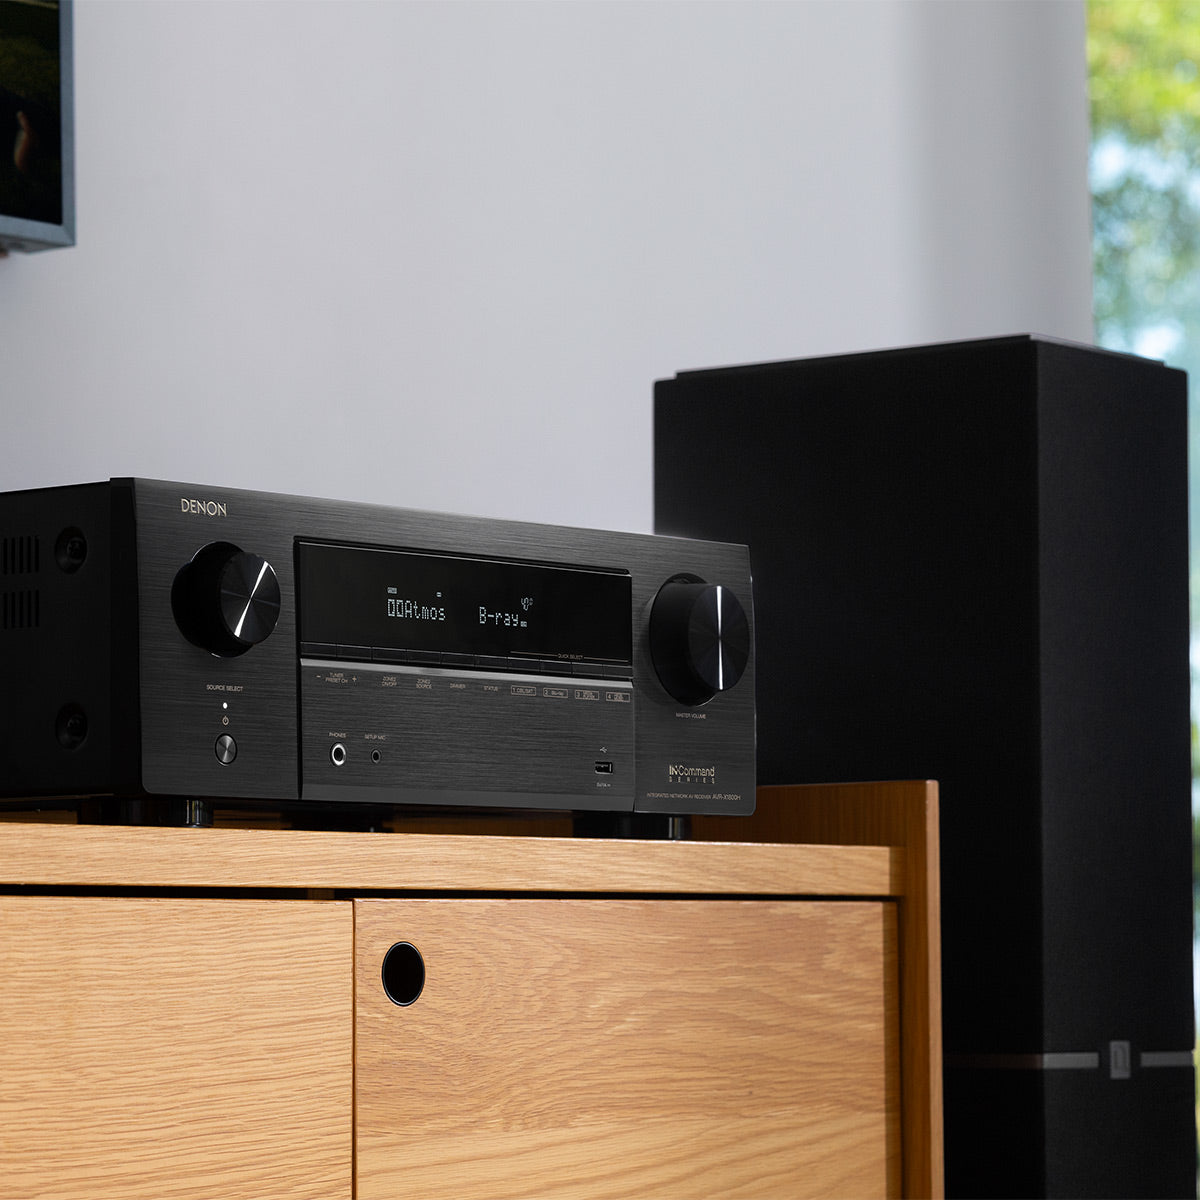 Denon AVRX1800H 7.2 Channel 8K Home Theater Receiver with Dolby Atmos, HEOS Built-In, and Audyssey Room Correction